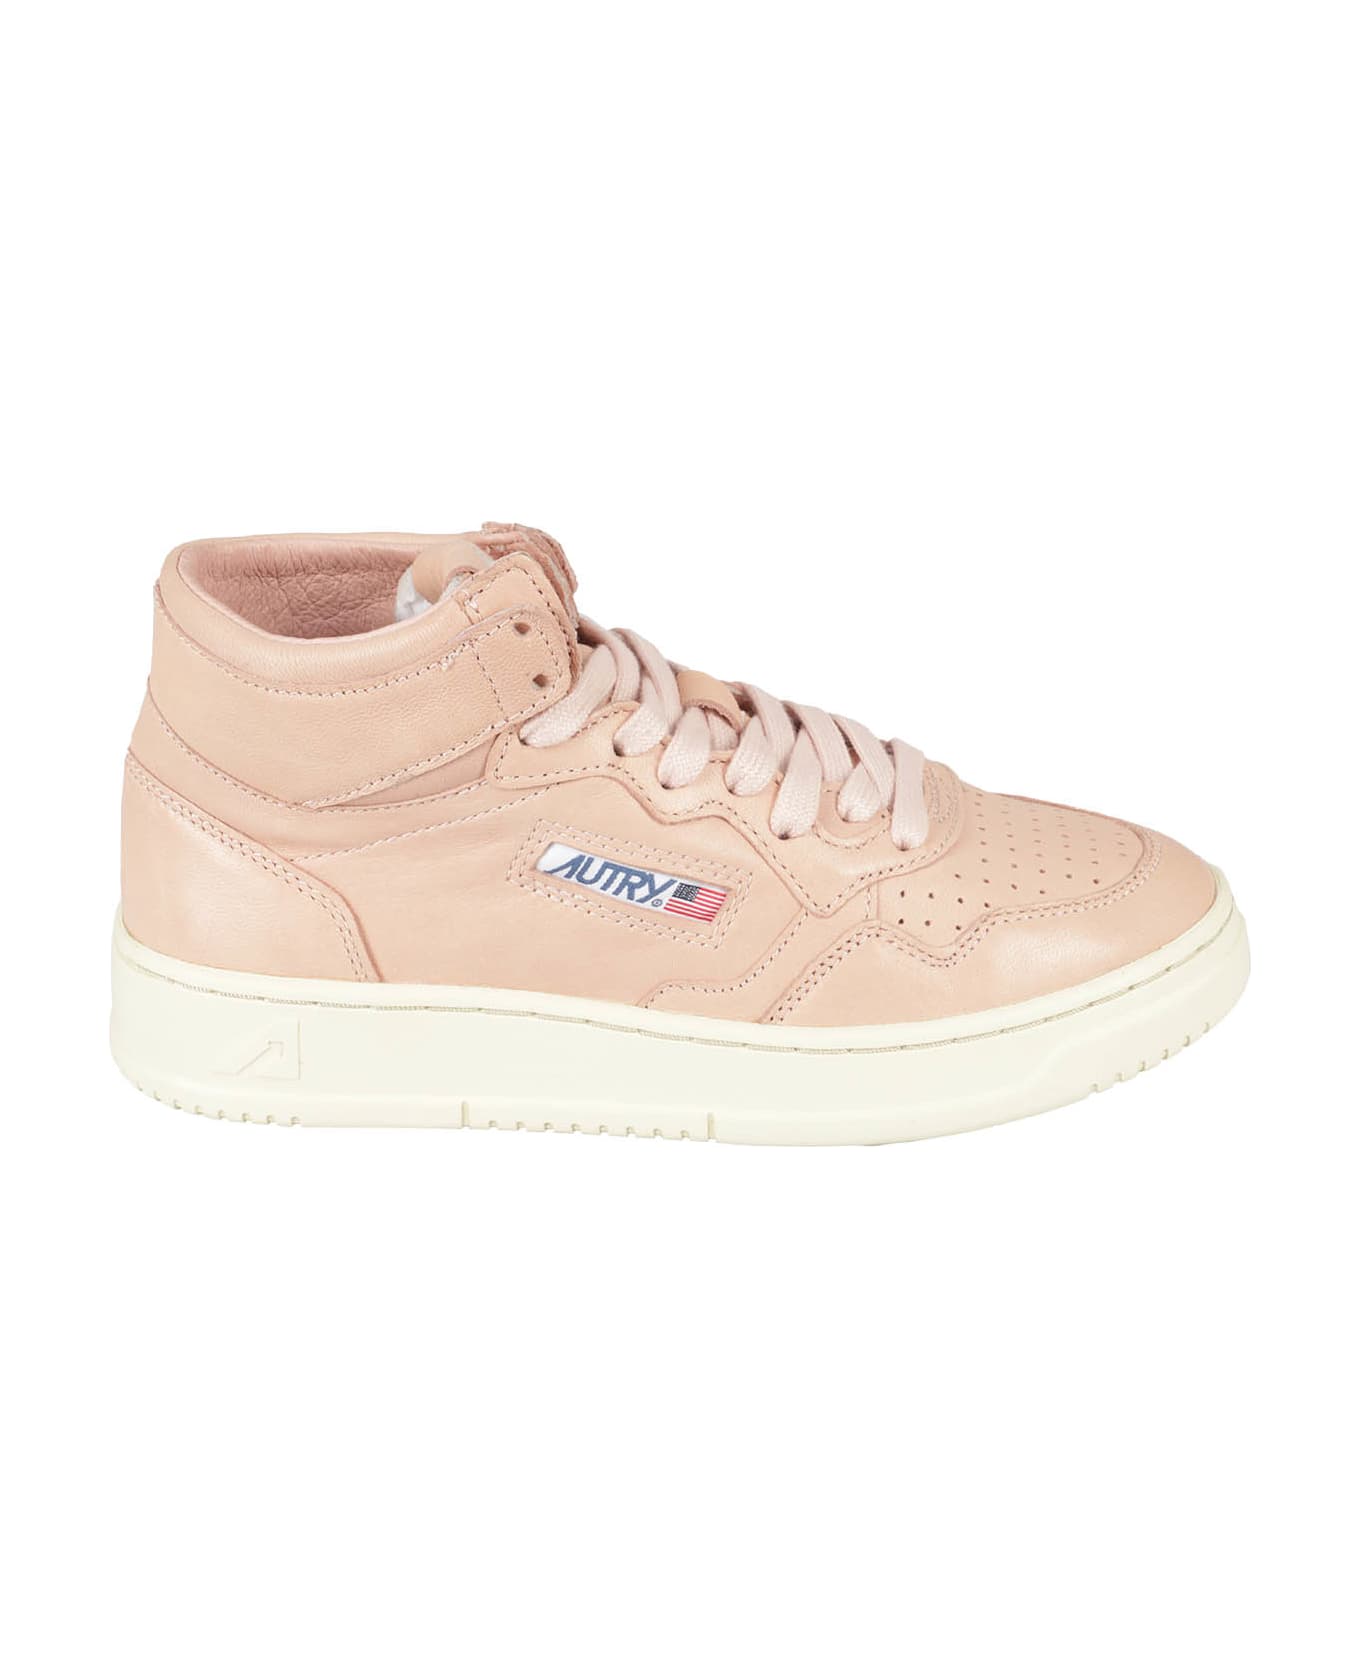 Autry Sneakers - Goat Peach